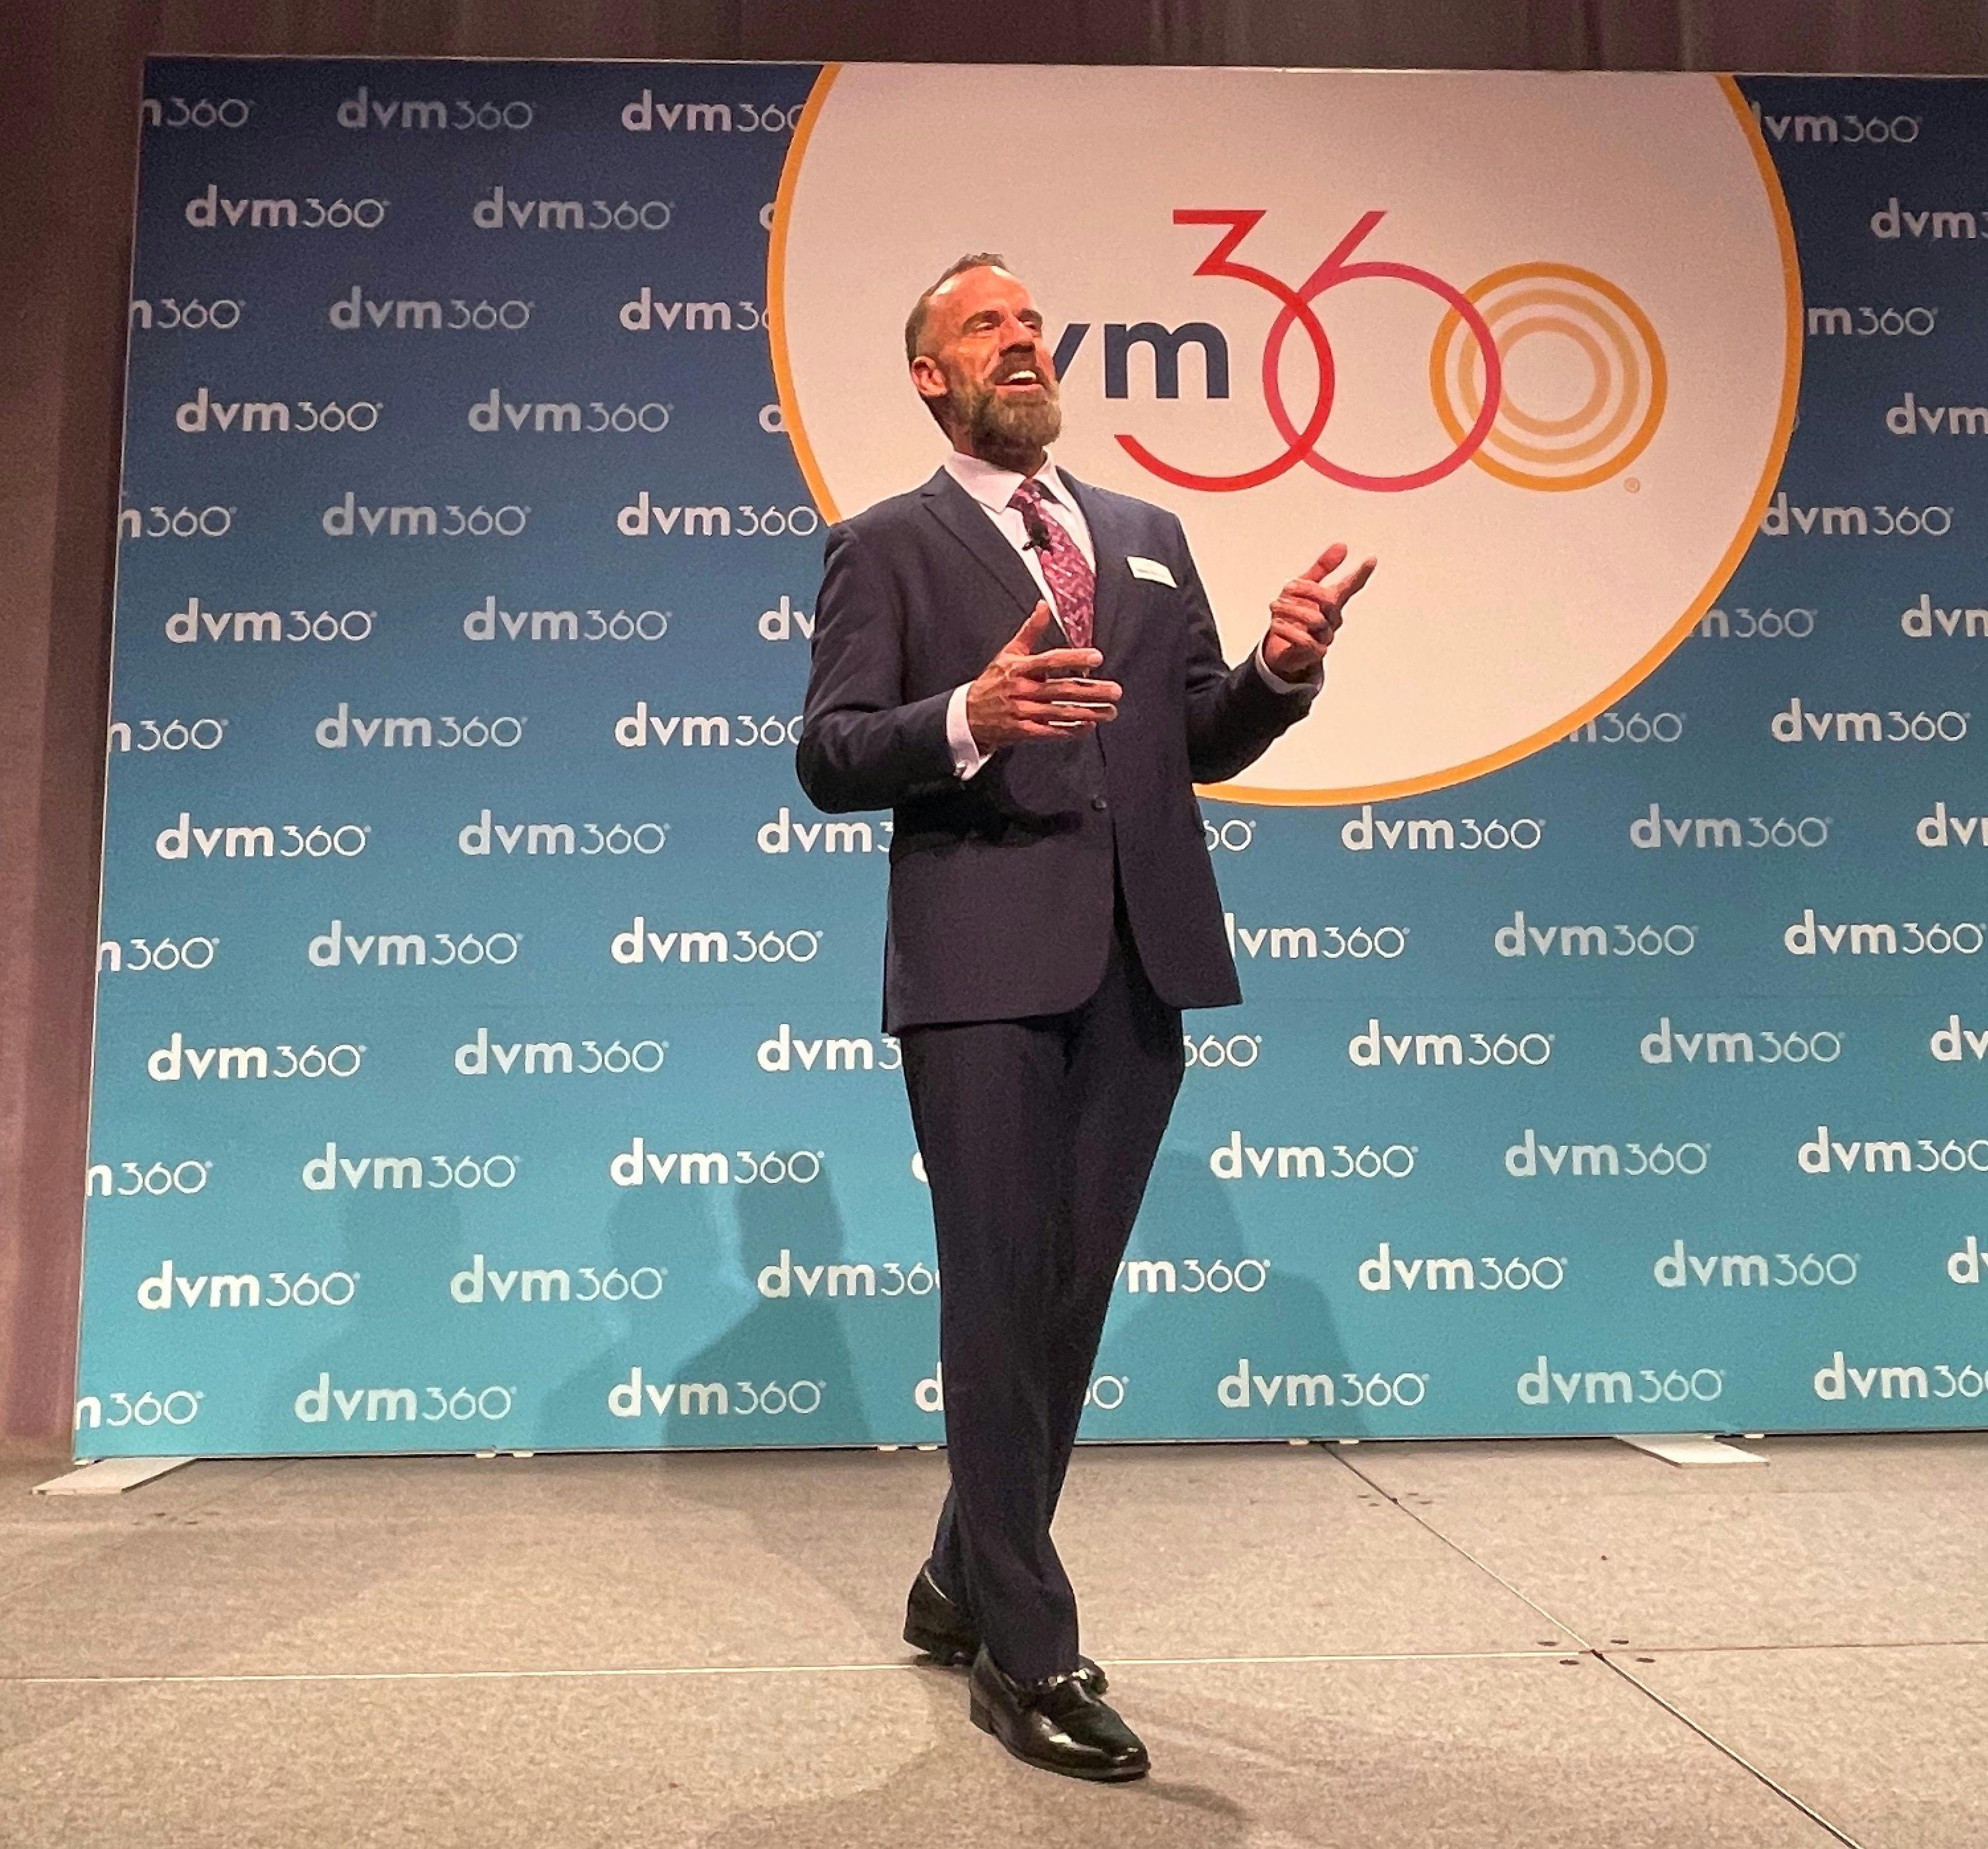 3 must reads on our Fetch dvm360® Kansas City conference